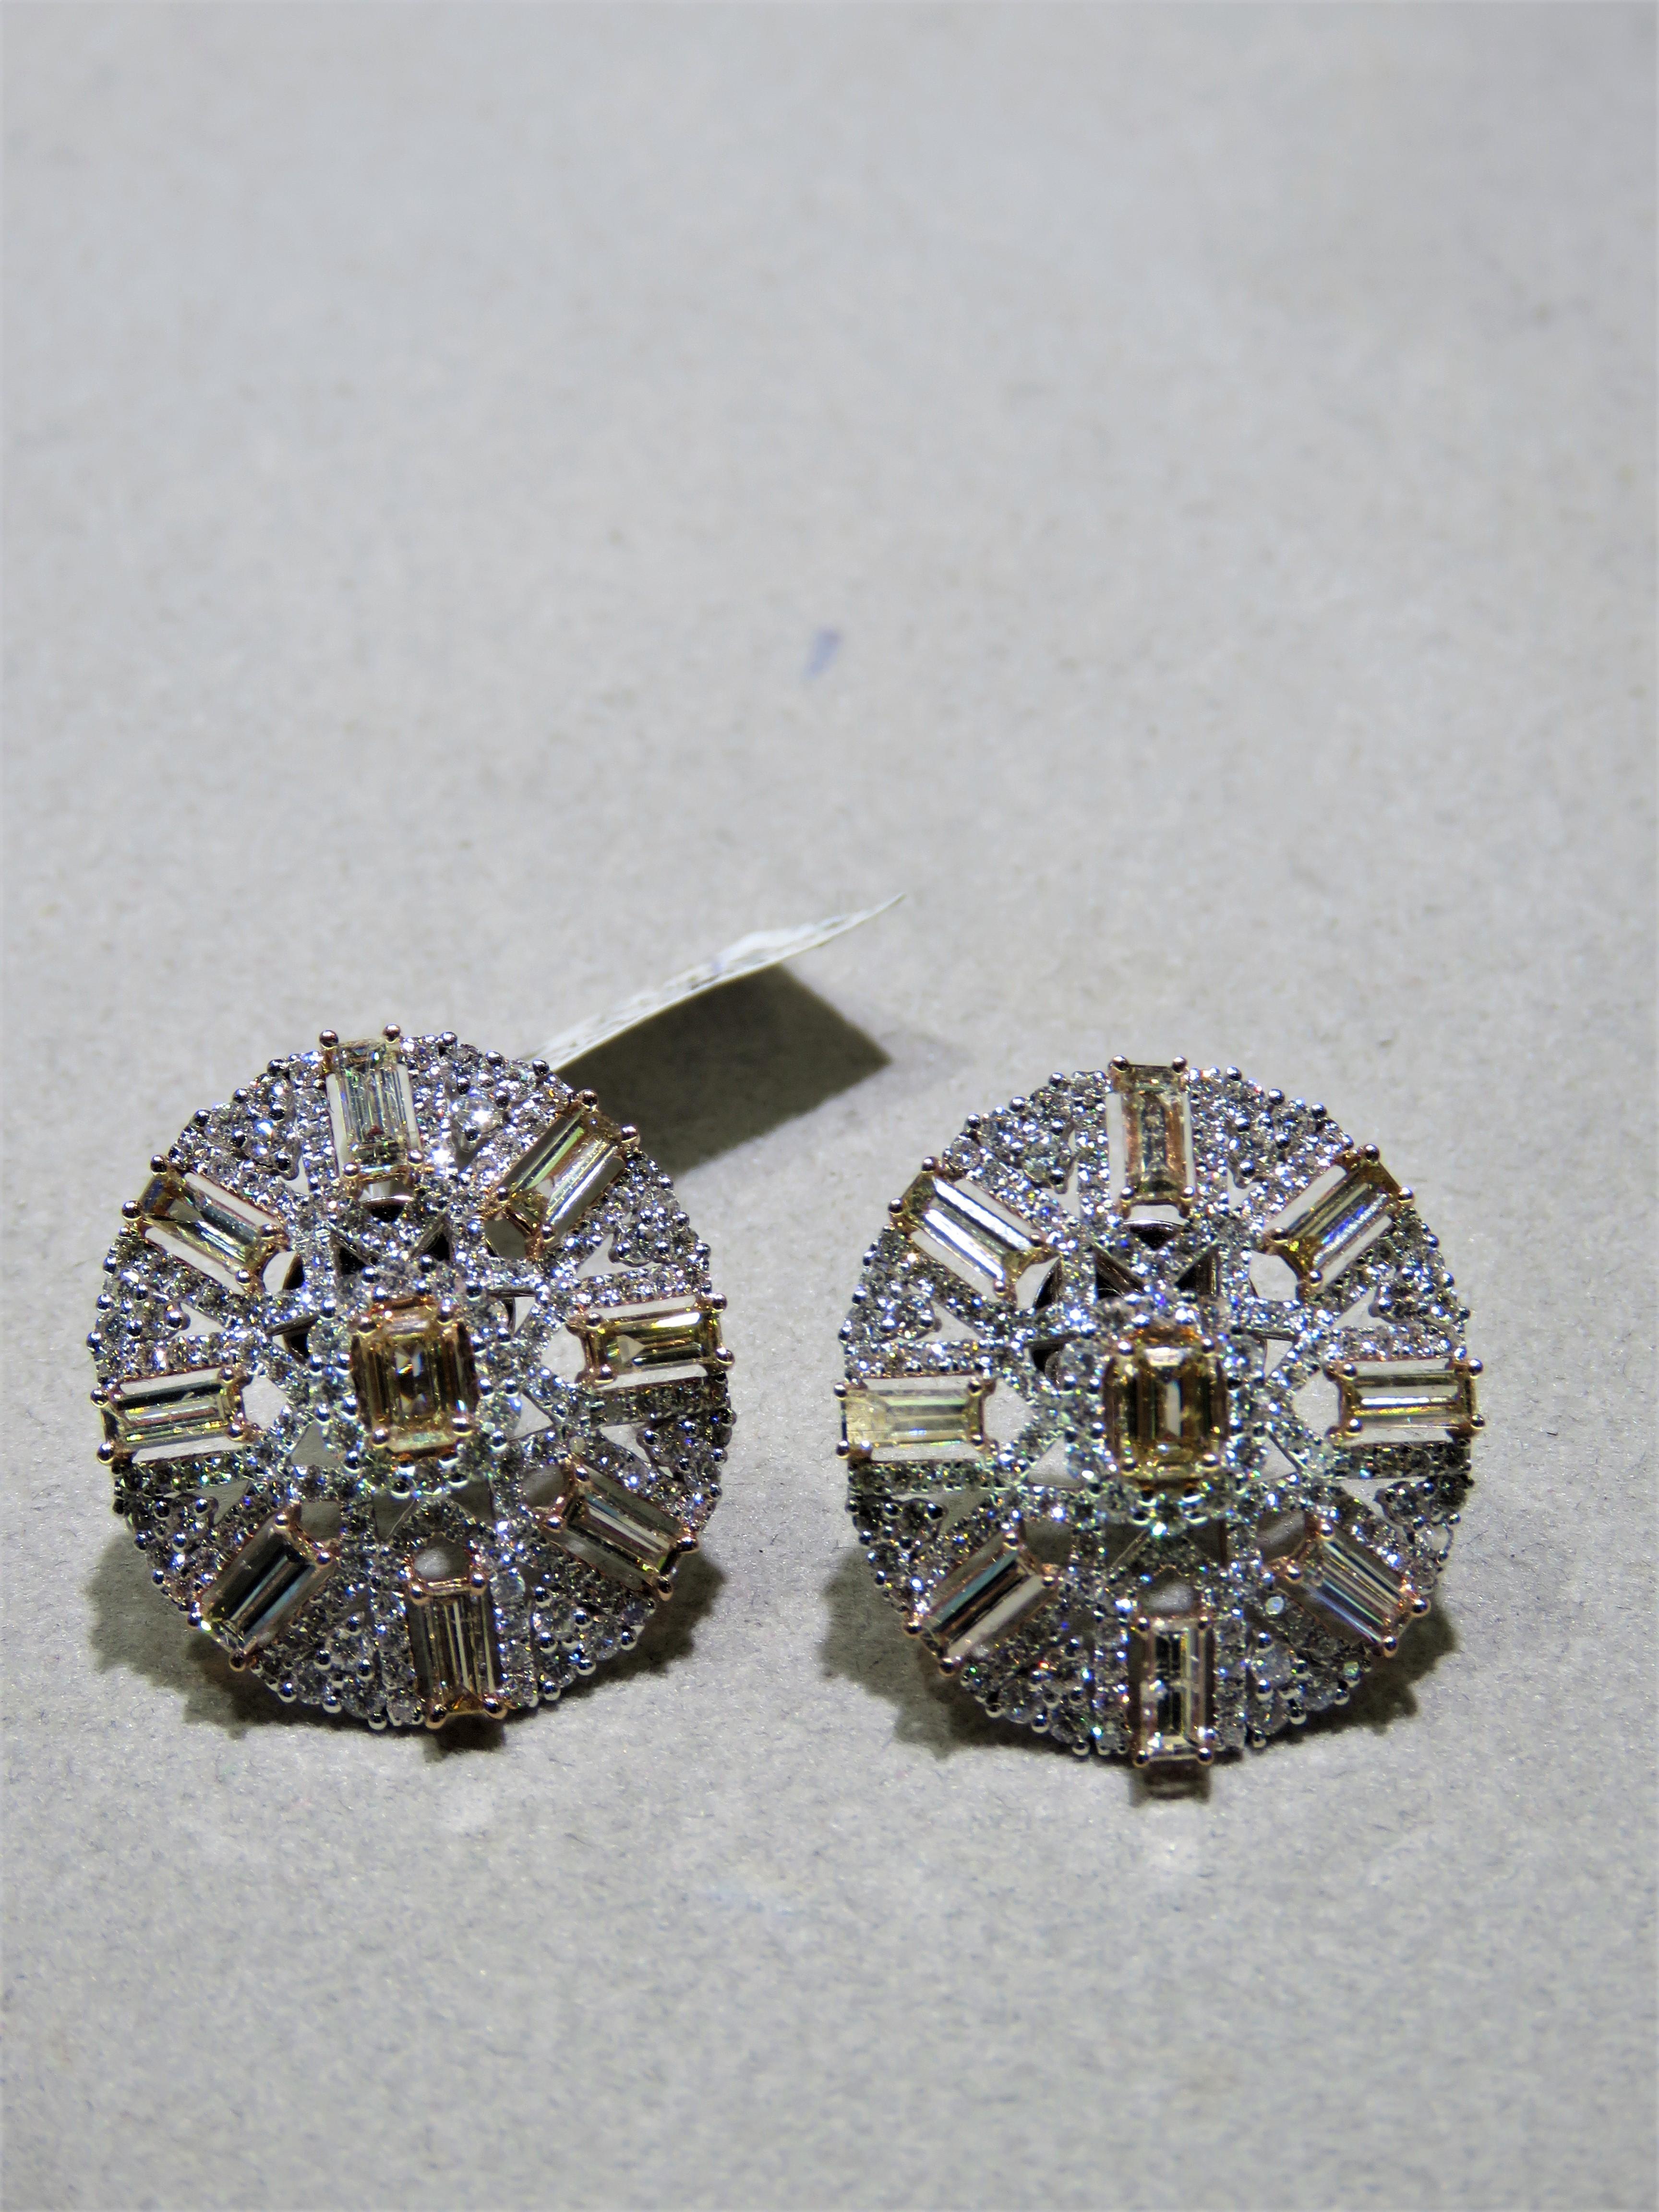 The Following Item we are offering are these Extremely Rare Beautiful 18KT Gold Fine Large Fancy Cognac Diamond and White Diamond Earrings. Each Earring features Rare Gorgeous Glittering Fancy Cognac Large Baguette Diamonds adorned with Sparkling